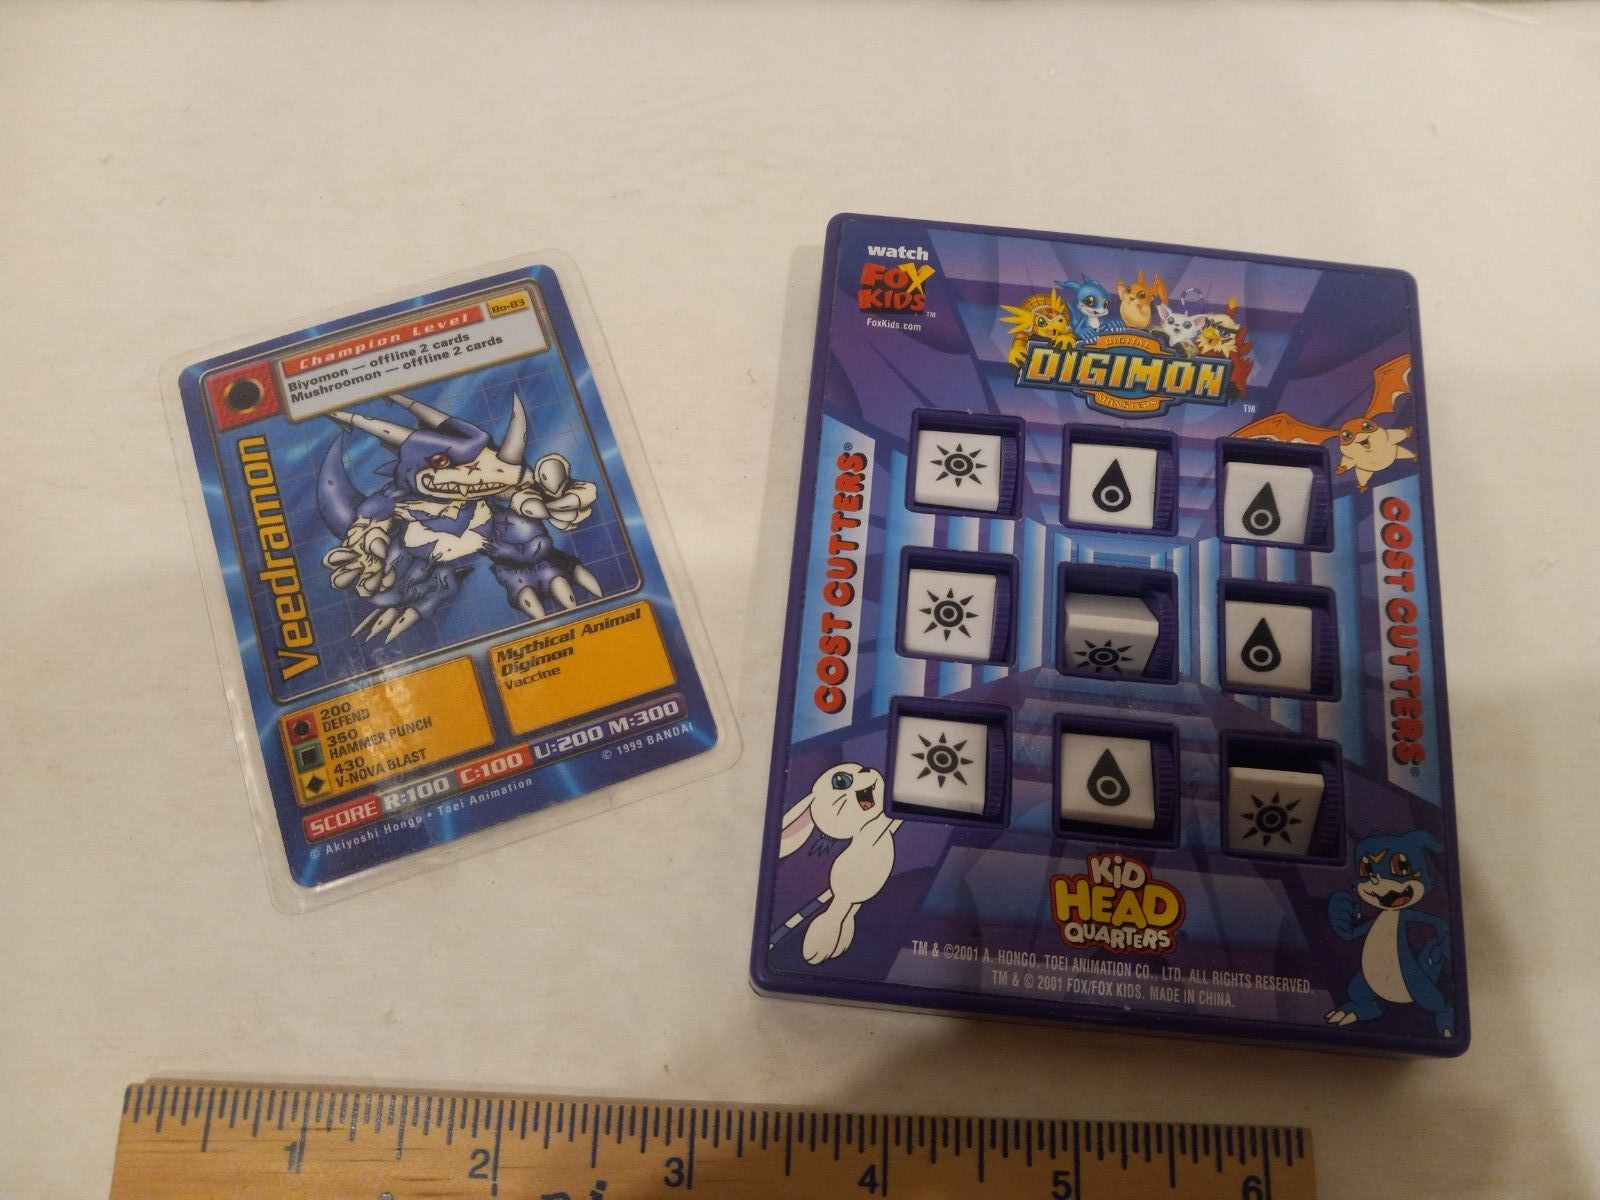 DIGIMON 2001 Toy Game and laminated card dated 1999 Bandai